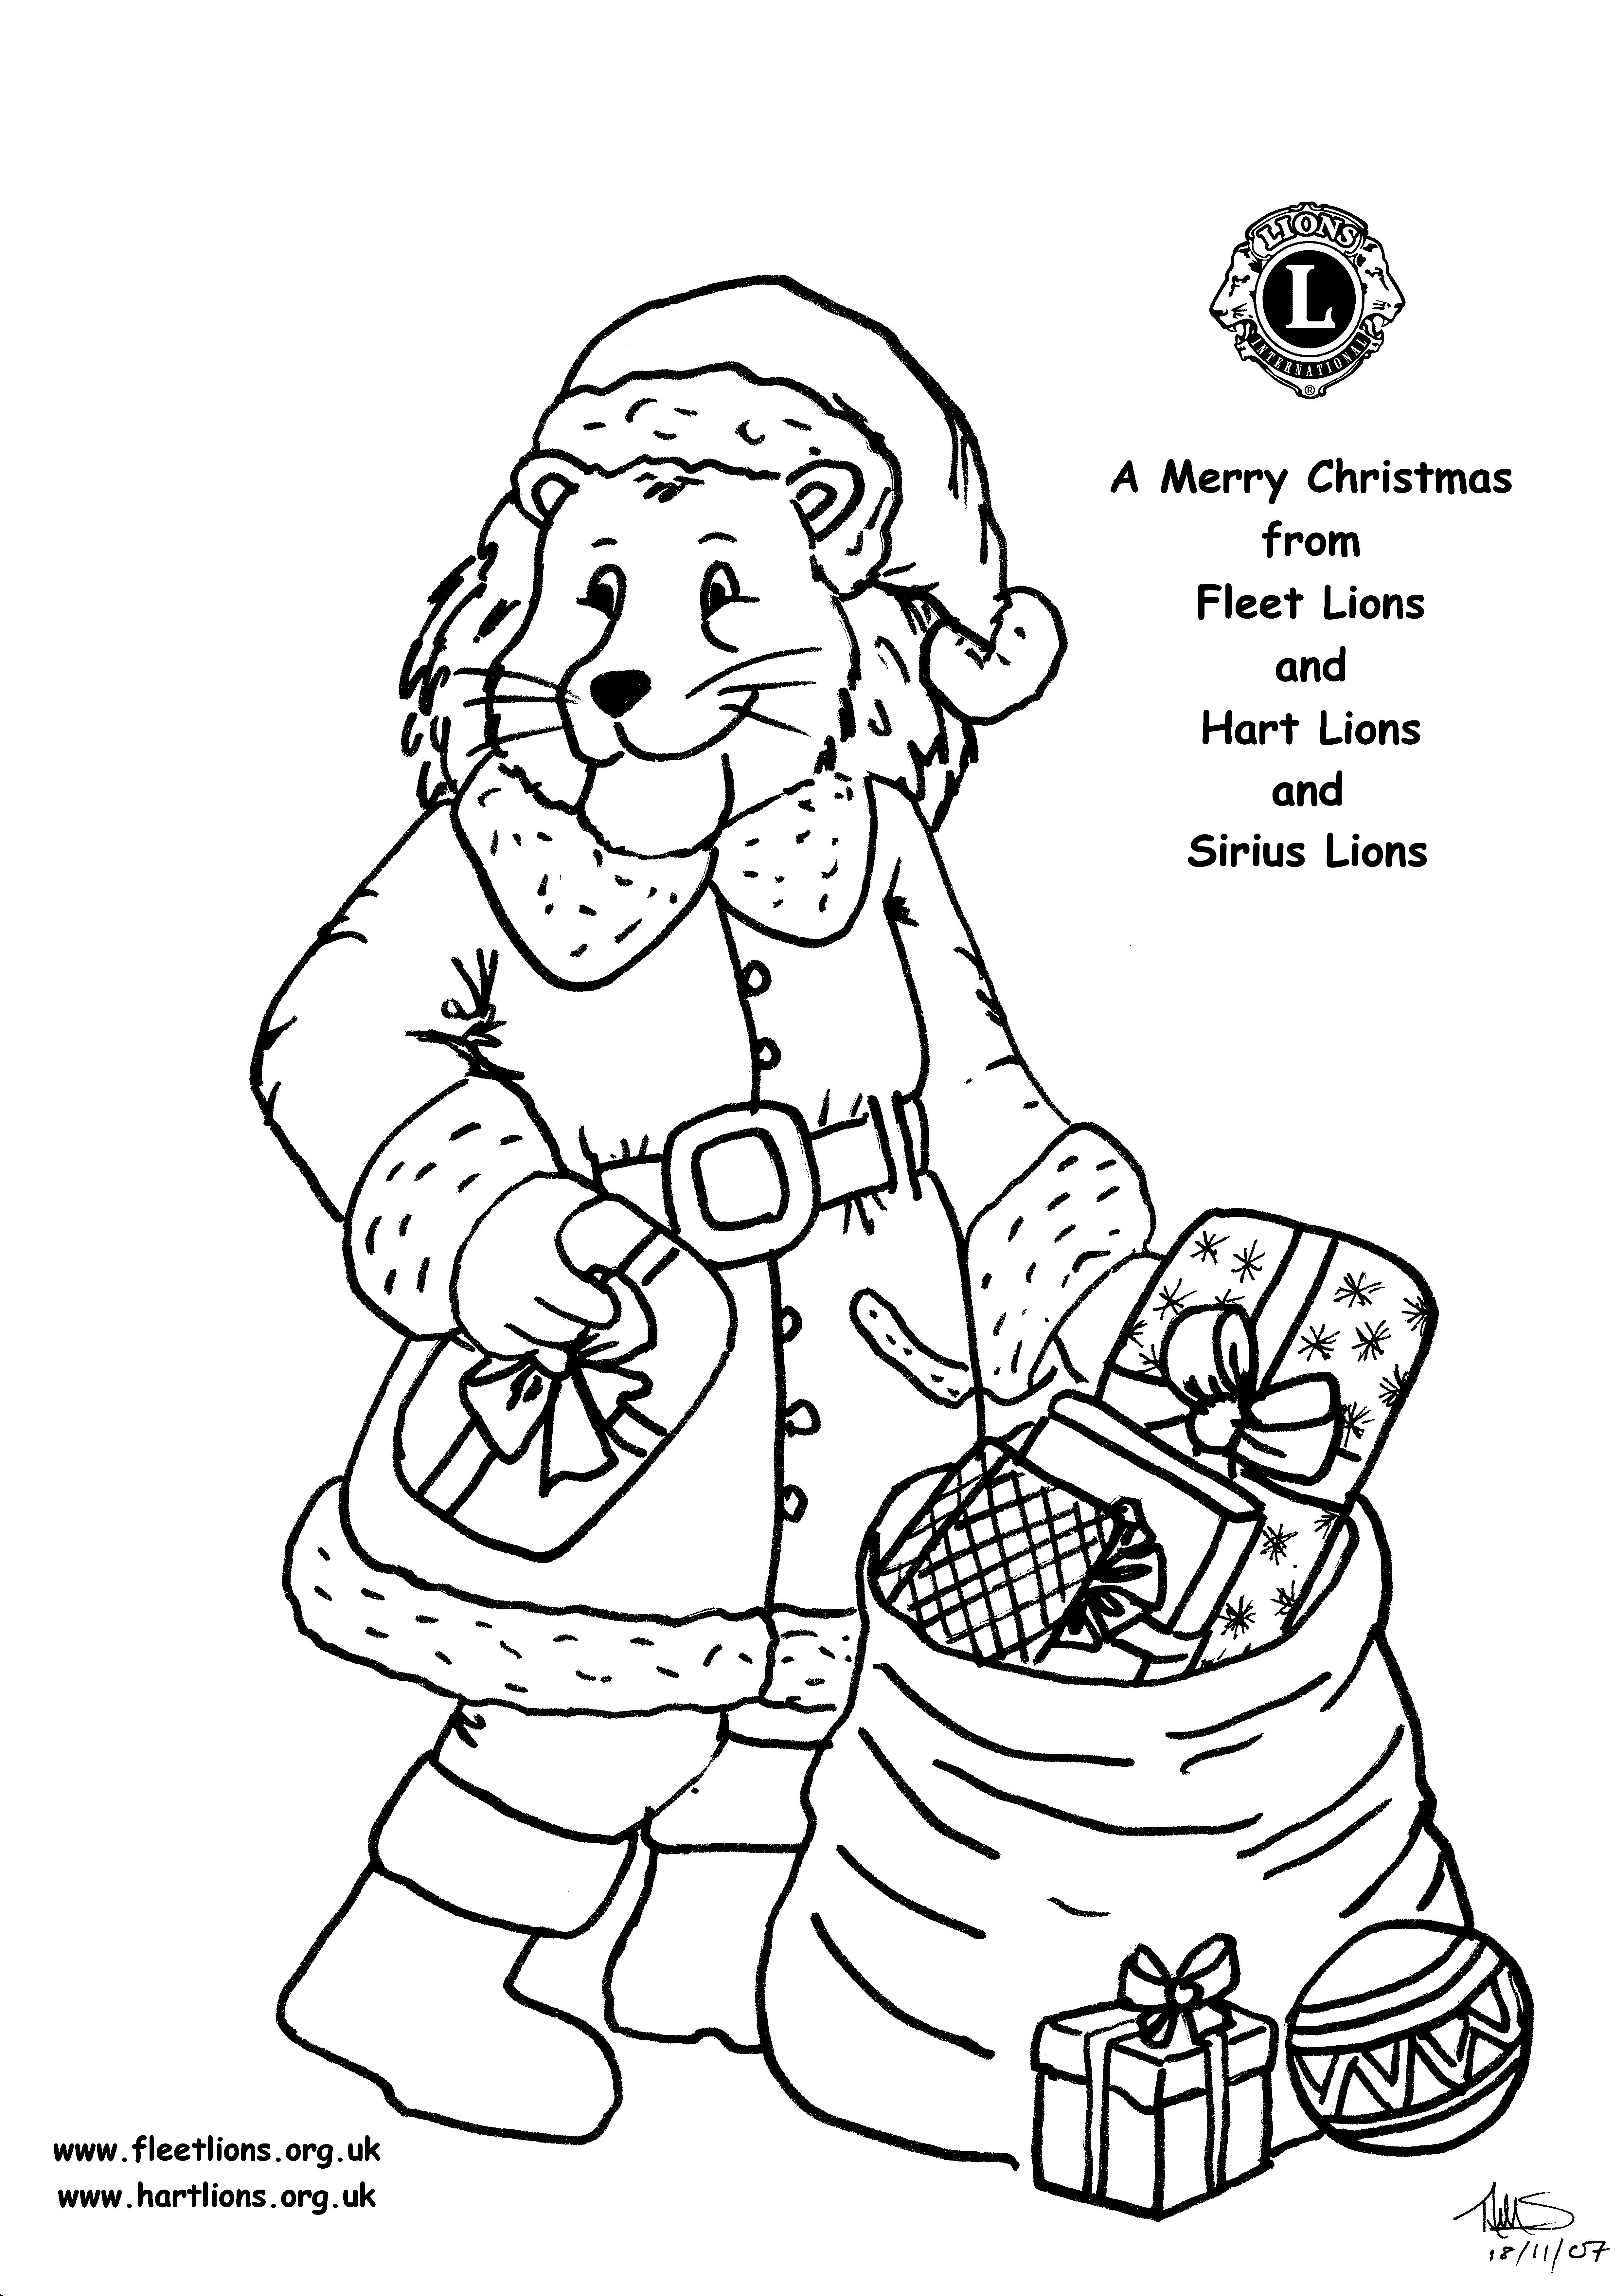 Fleet Lions - serving the community since 1974 - Where will Santa be